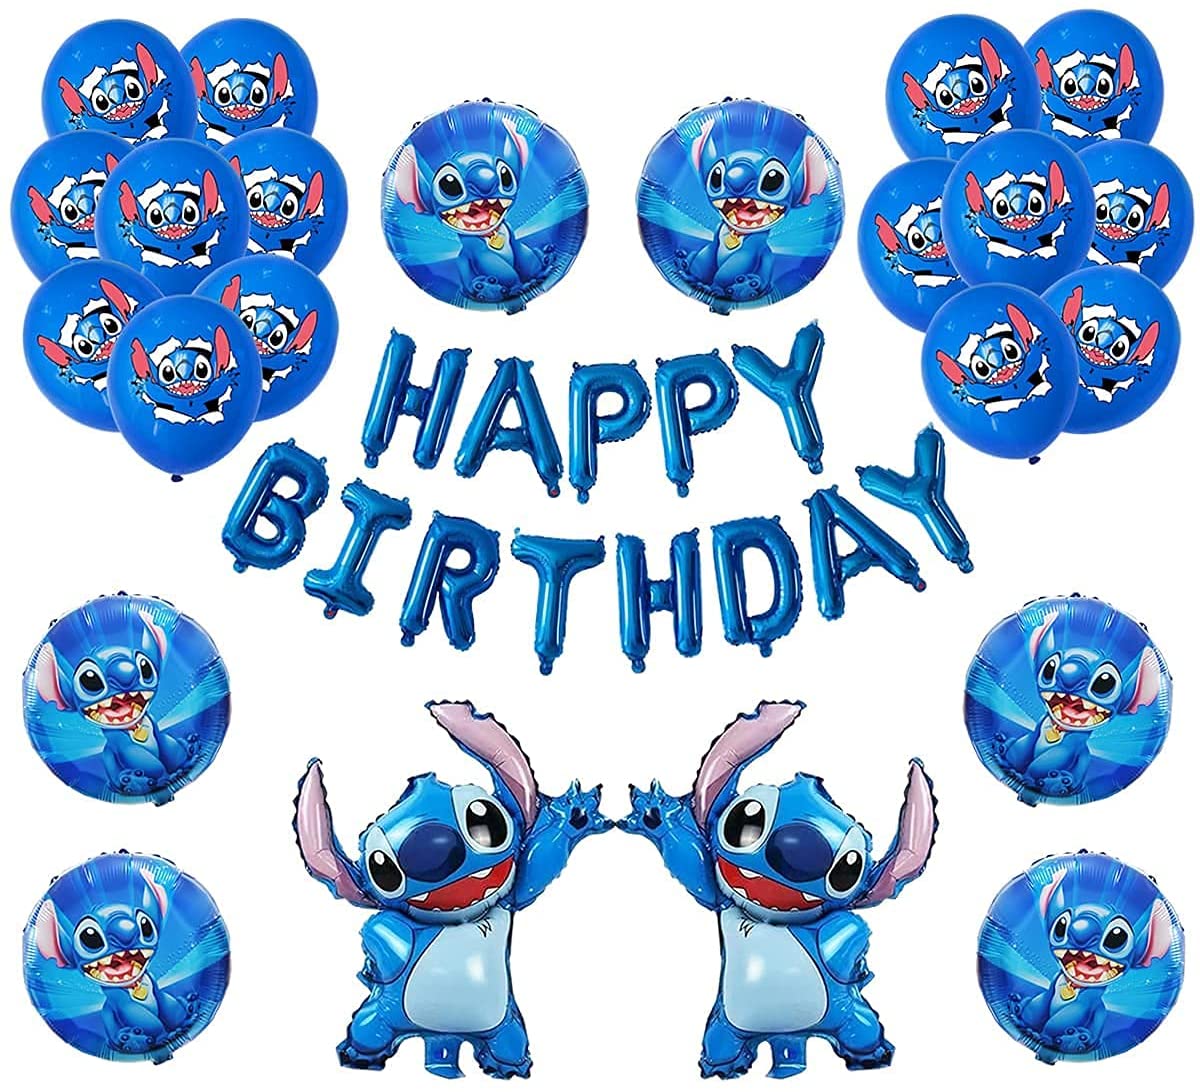 Buy 36PCS Lilo and Stitch Balloons, Stitch Happy Birthday Balloons Aluminum Foil Letters Banner Balloons Decoration, Children's Birthday Party Supplies Online in Russia. B09C6CP5BP